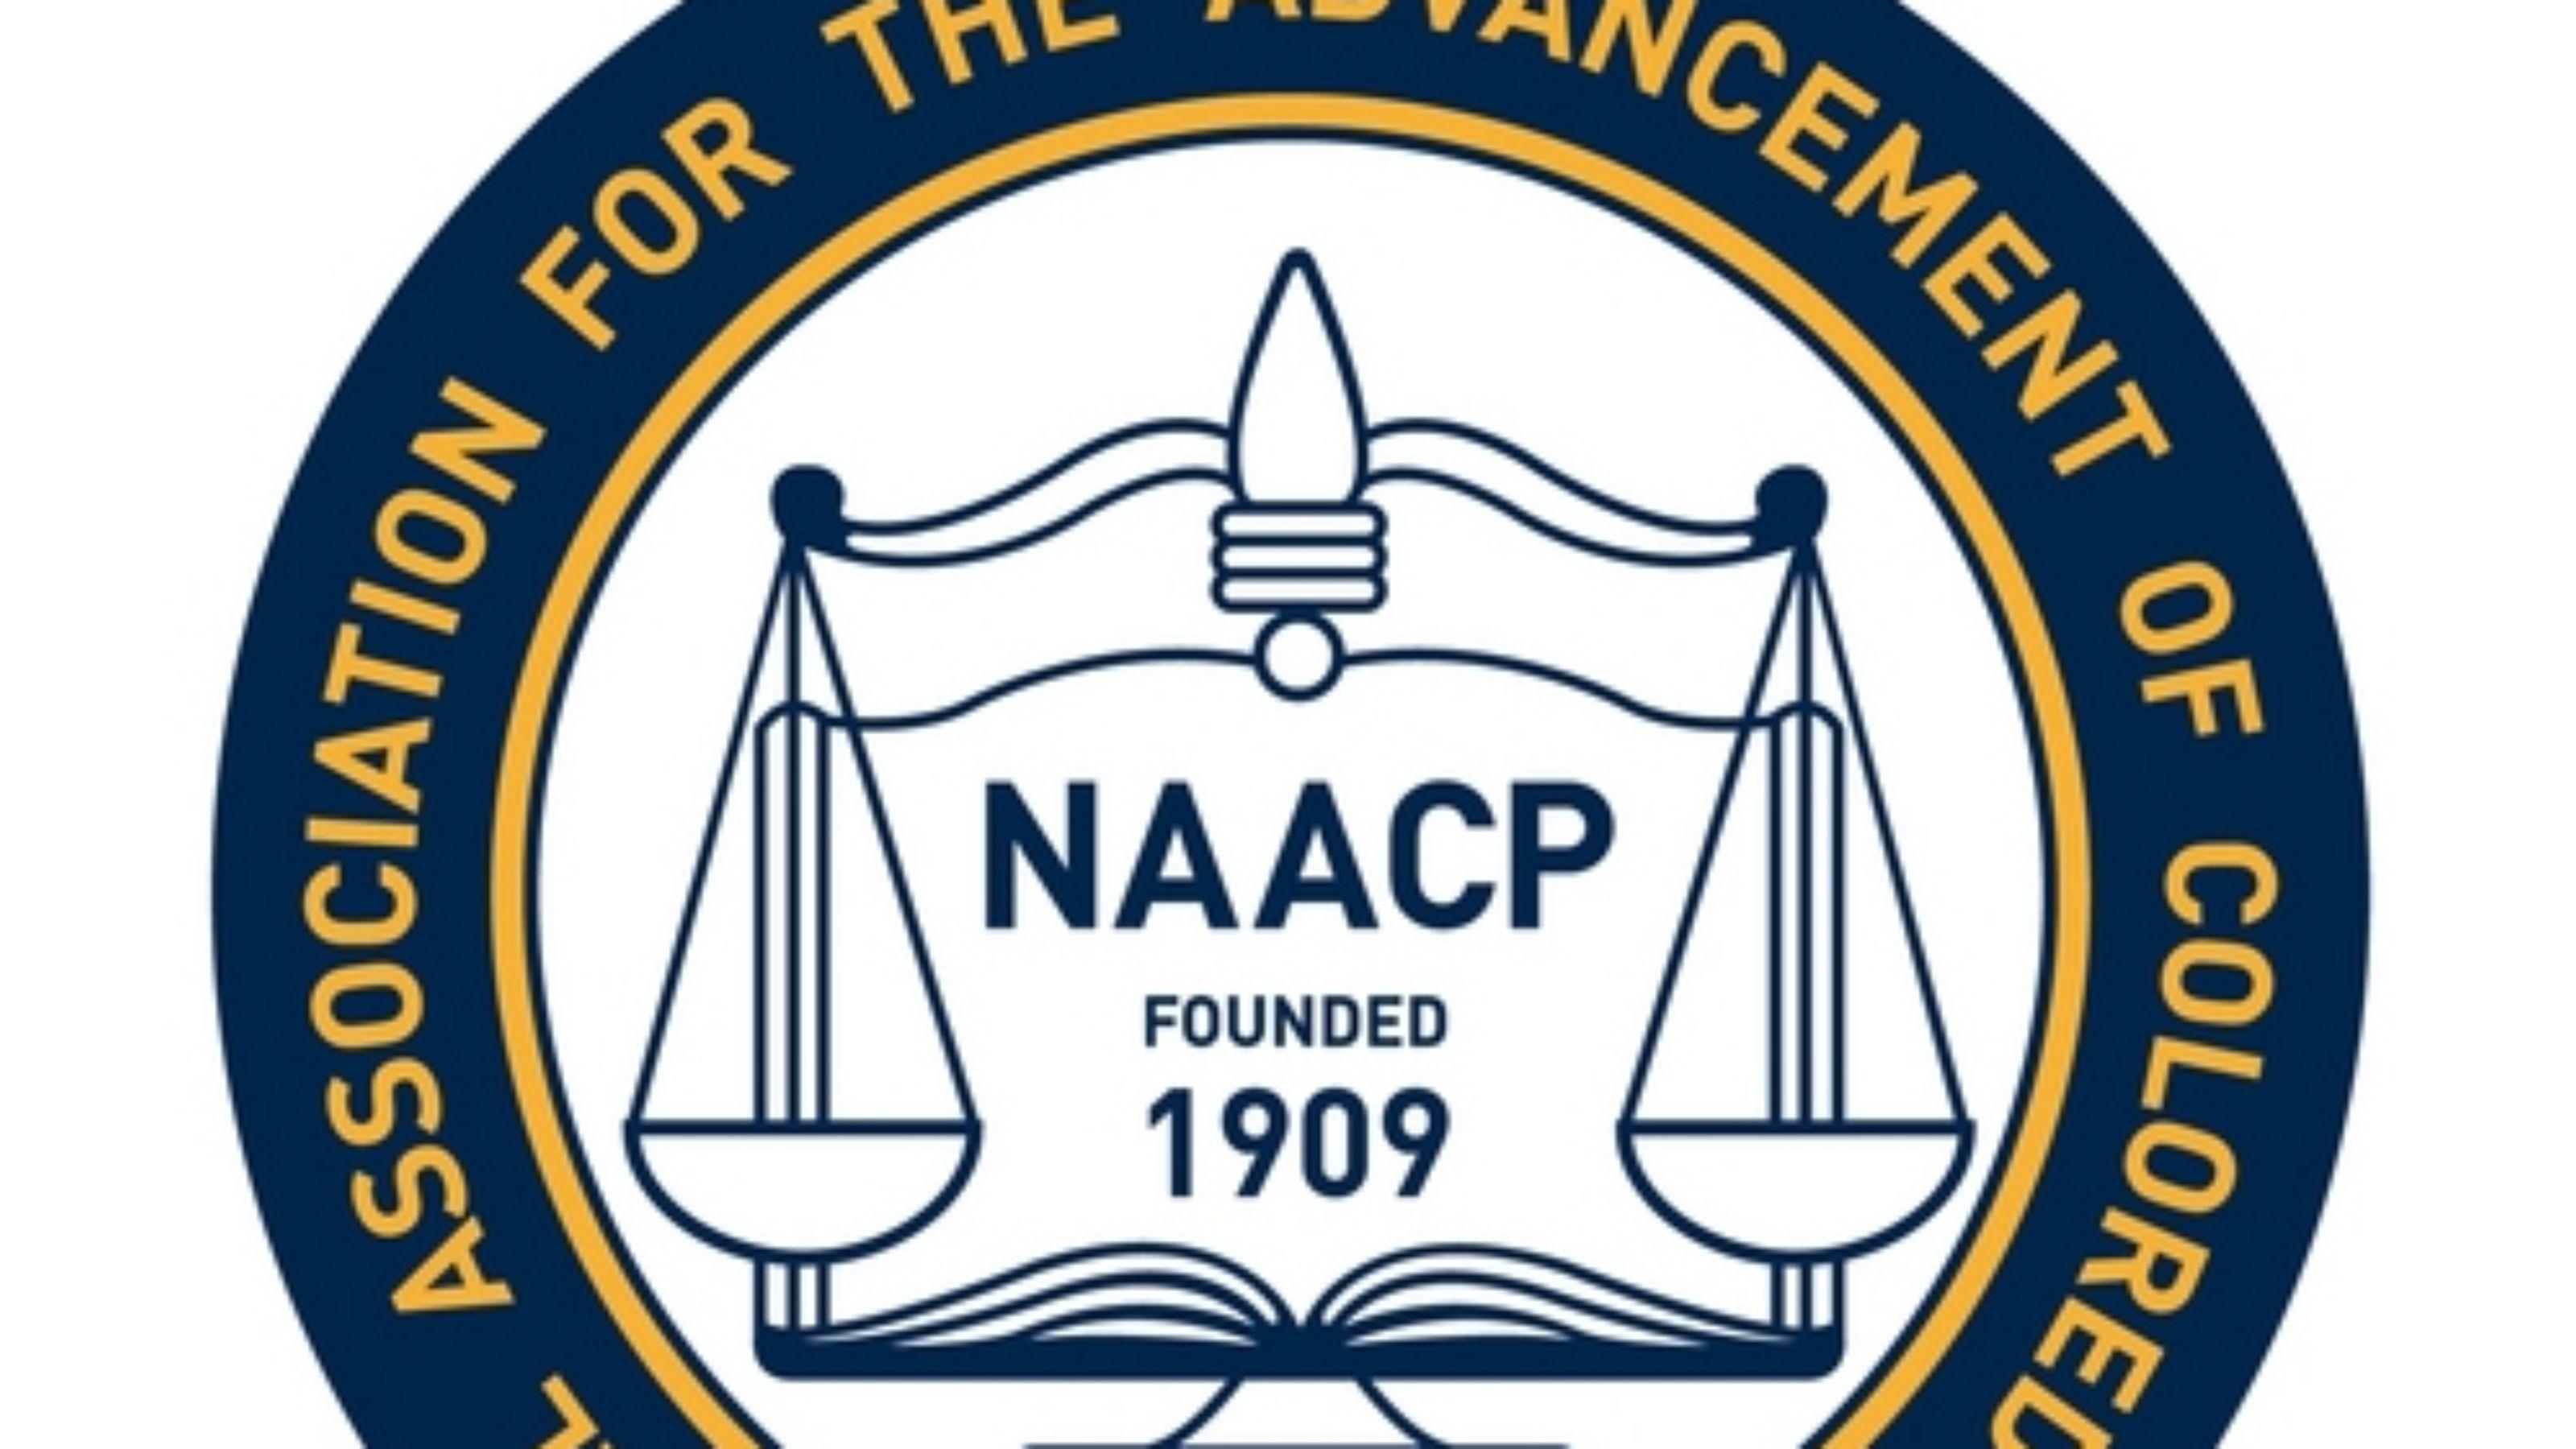 NAACP Logo - Everything You Need to Know About the NAACP's Stance on Charter Schools